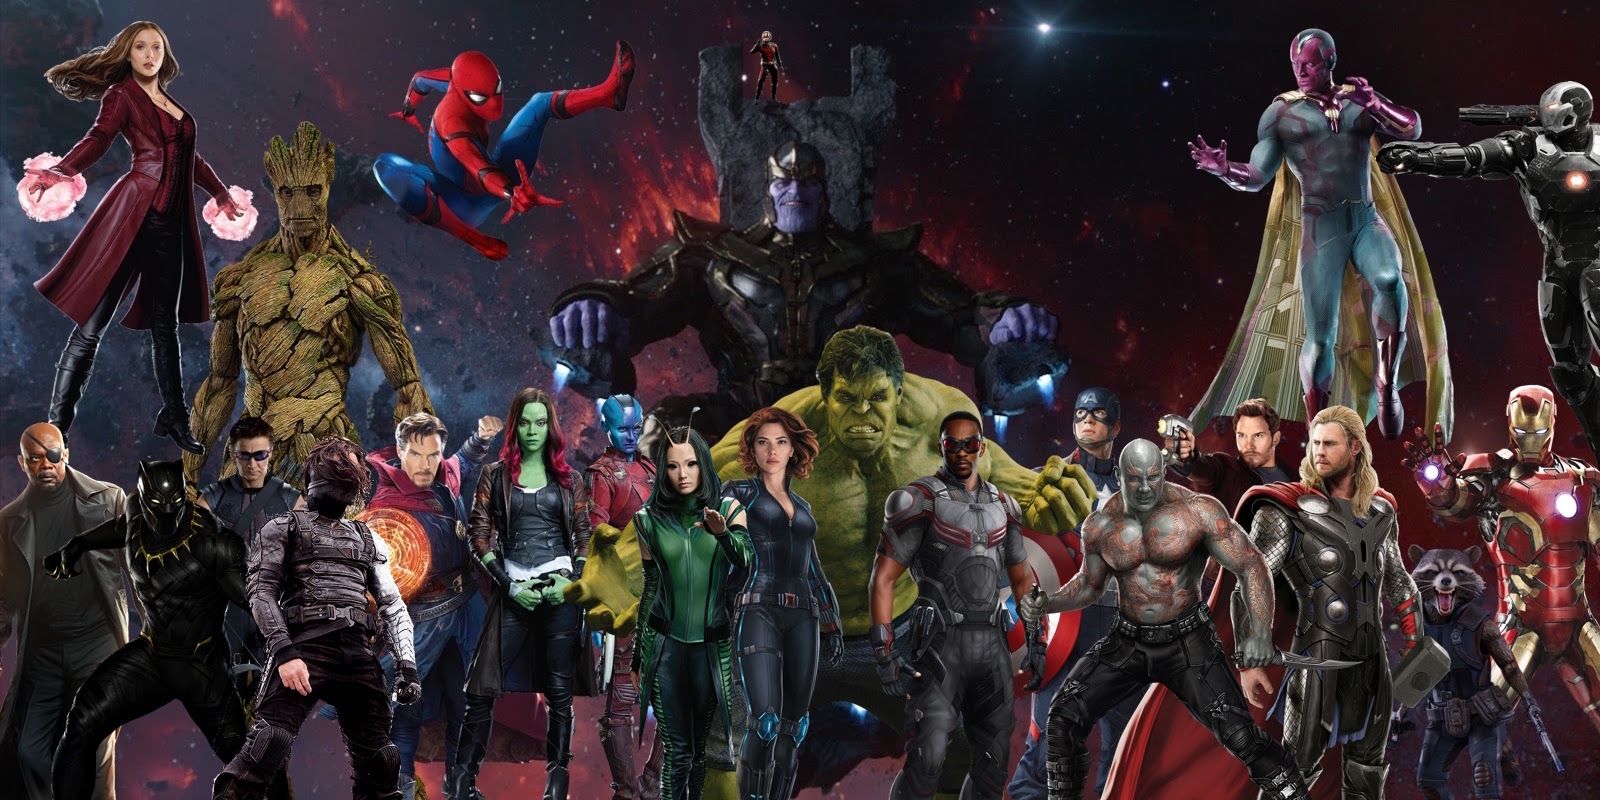 Avengers 4 Cast: Every Character Confirmed to Appear